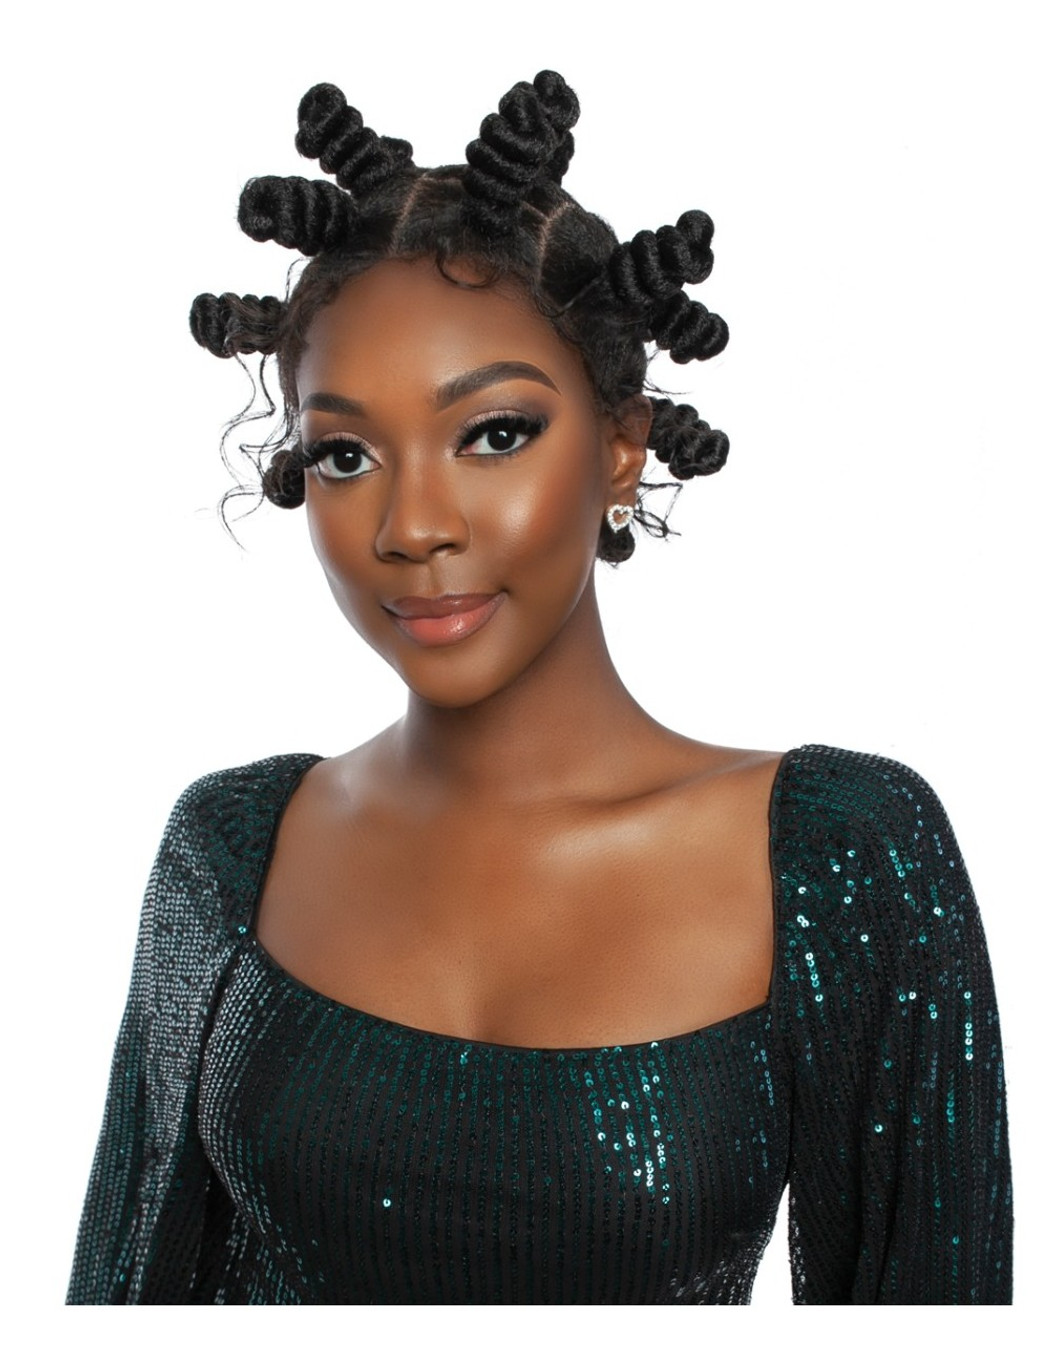 MANE CONCEPT Red Carpet HD Braided Full Lace Front Wig - RCFB201 Zulu Bantu Knots